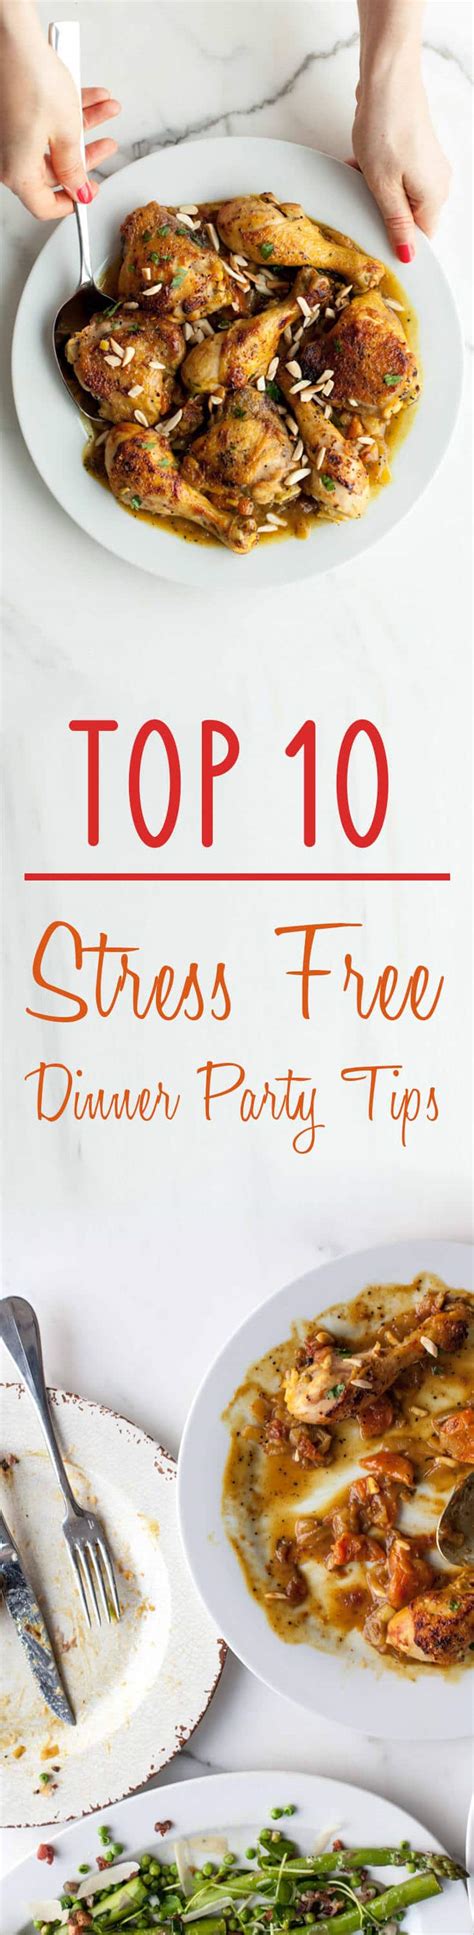 One thing, not on a list, but in my mind. Top 10 Stress-Free Dinner Party Tips for Holiday Entertaining